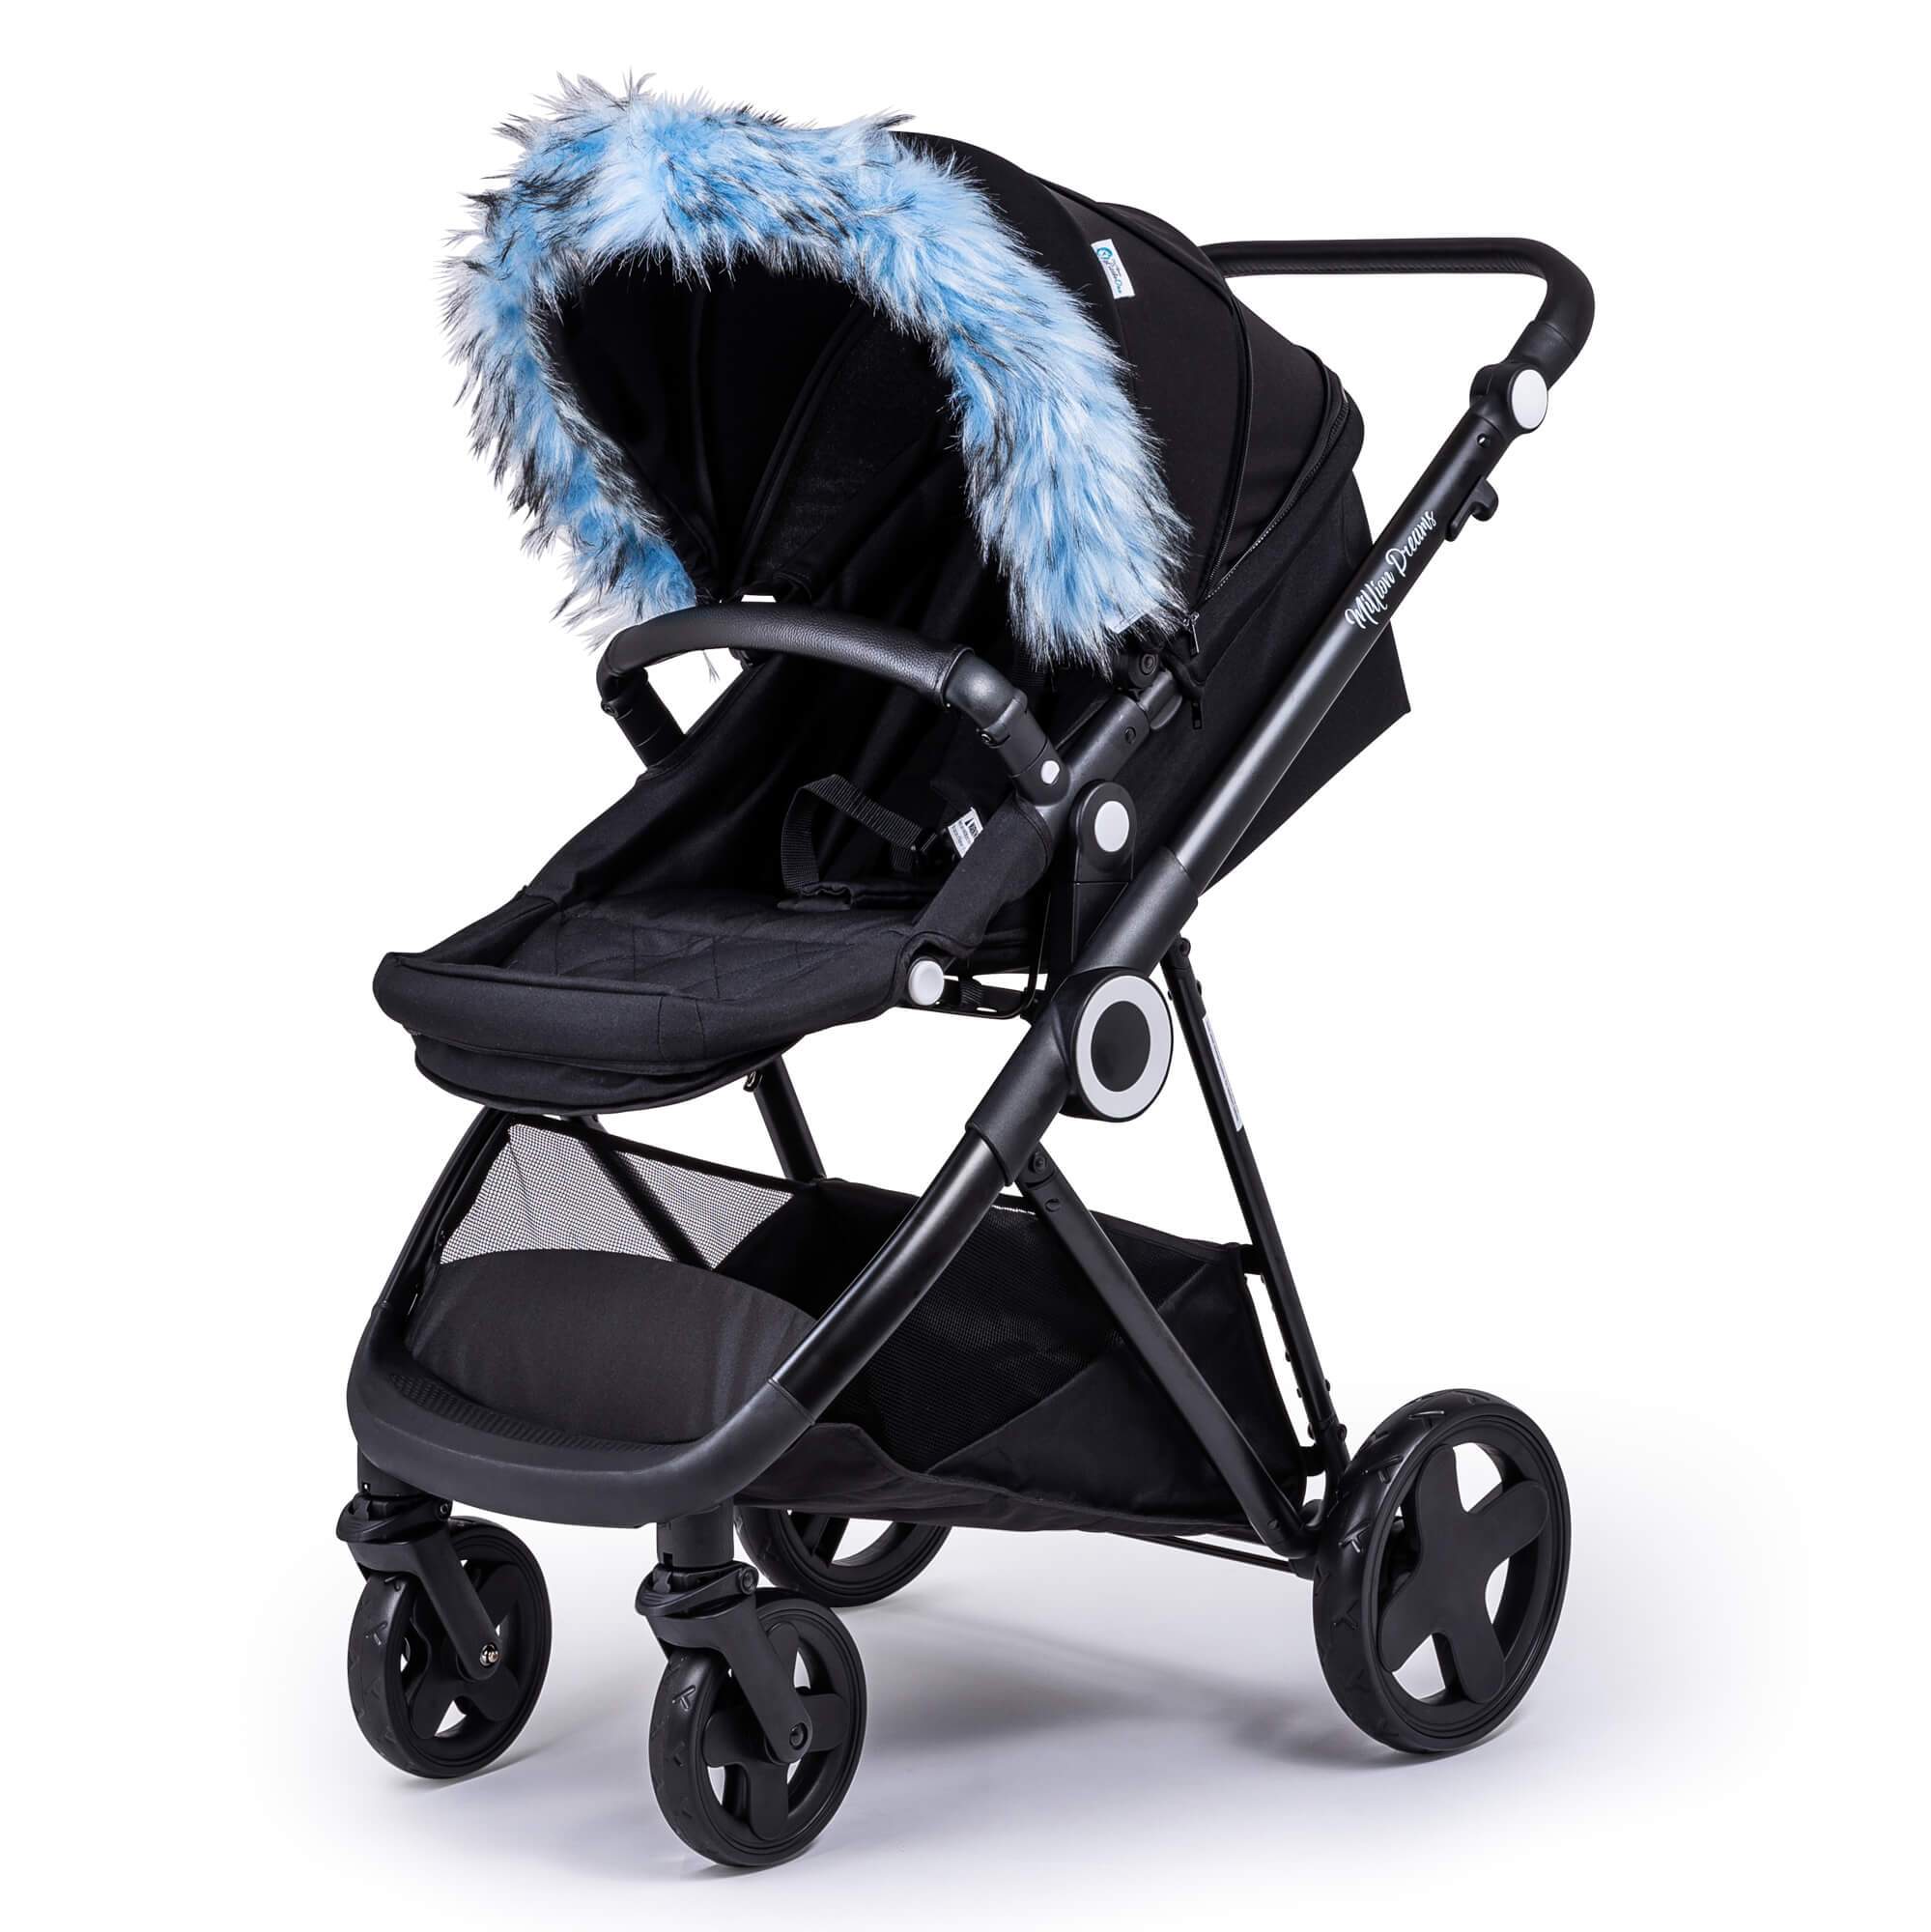 Pram Fur Hood Trim Attachment for Pushchair Compatible with Recaro - Light Blue / Fits All Models | For Your Little One